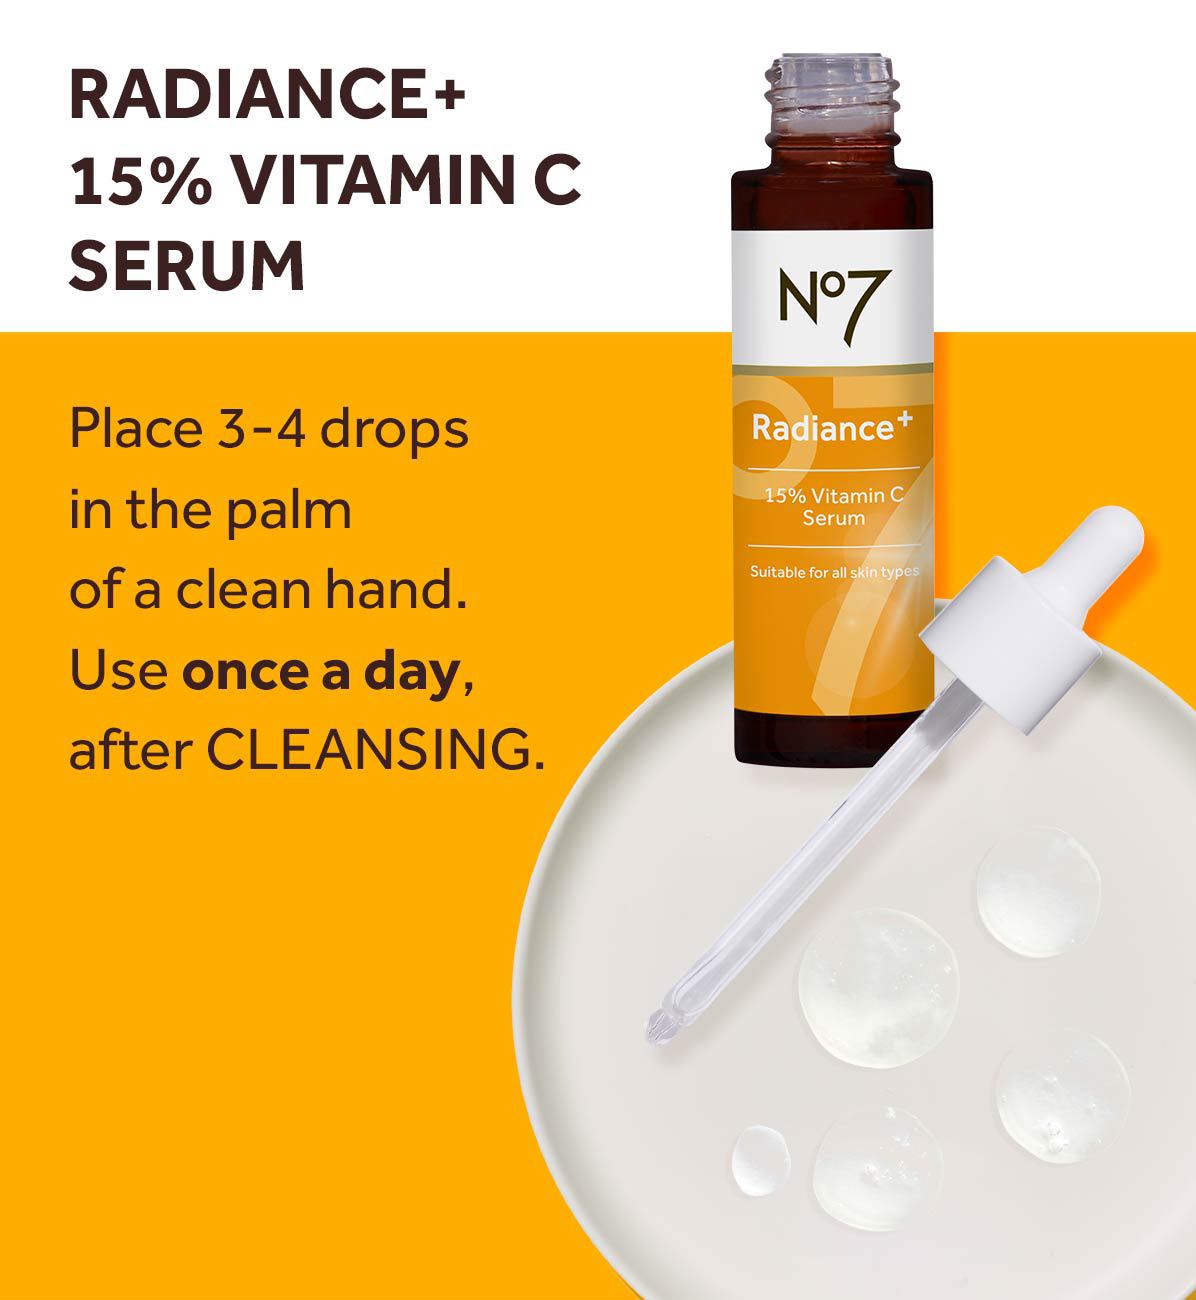 RADIANCE+ 15% VITAMIN C SERUM Place 3-4 drops in the palm of a clean hand. Use once a day, after CLEANSING. N°7 Radiance+ 15% Vitamin C Serum Suitable for all skin types.